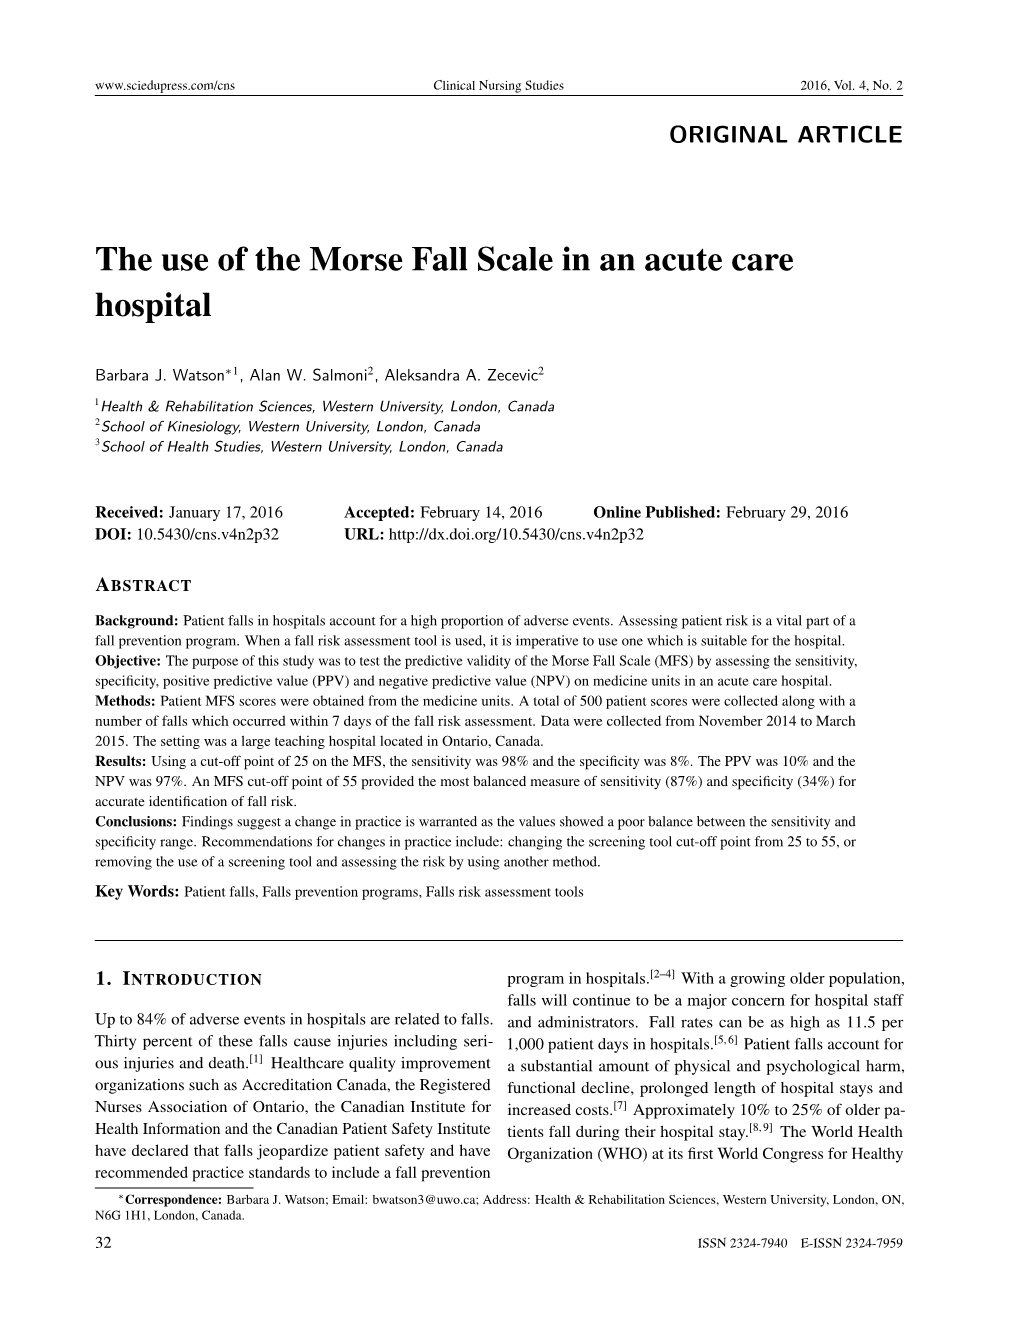 The Use of the Morse Fall Scale in an Acute Care Hospital